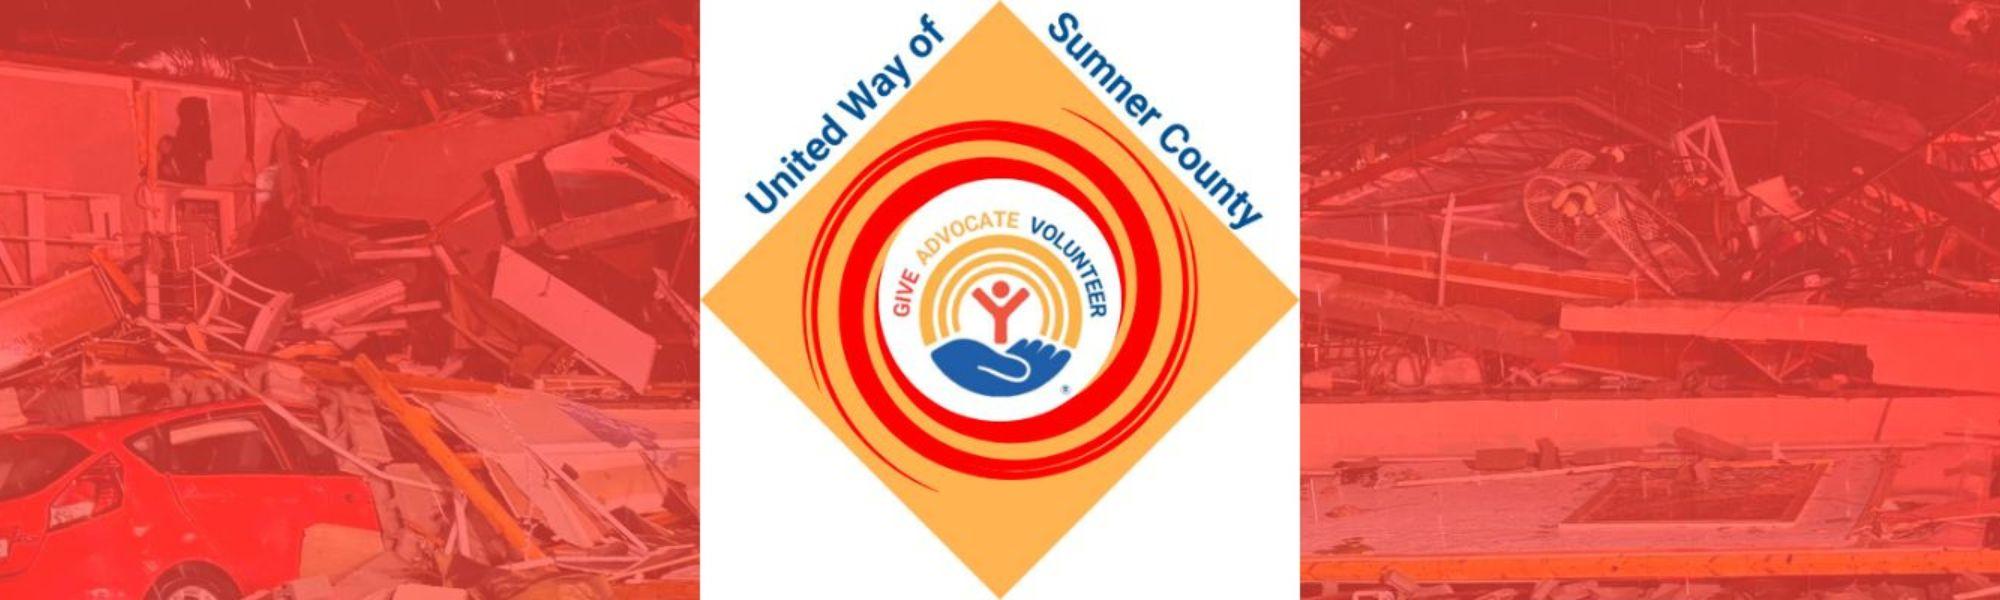 UWSC Disaster Relief logo with storm damage and red overlay